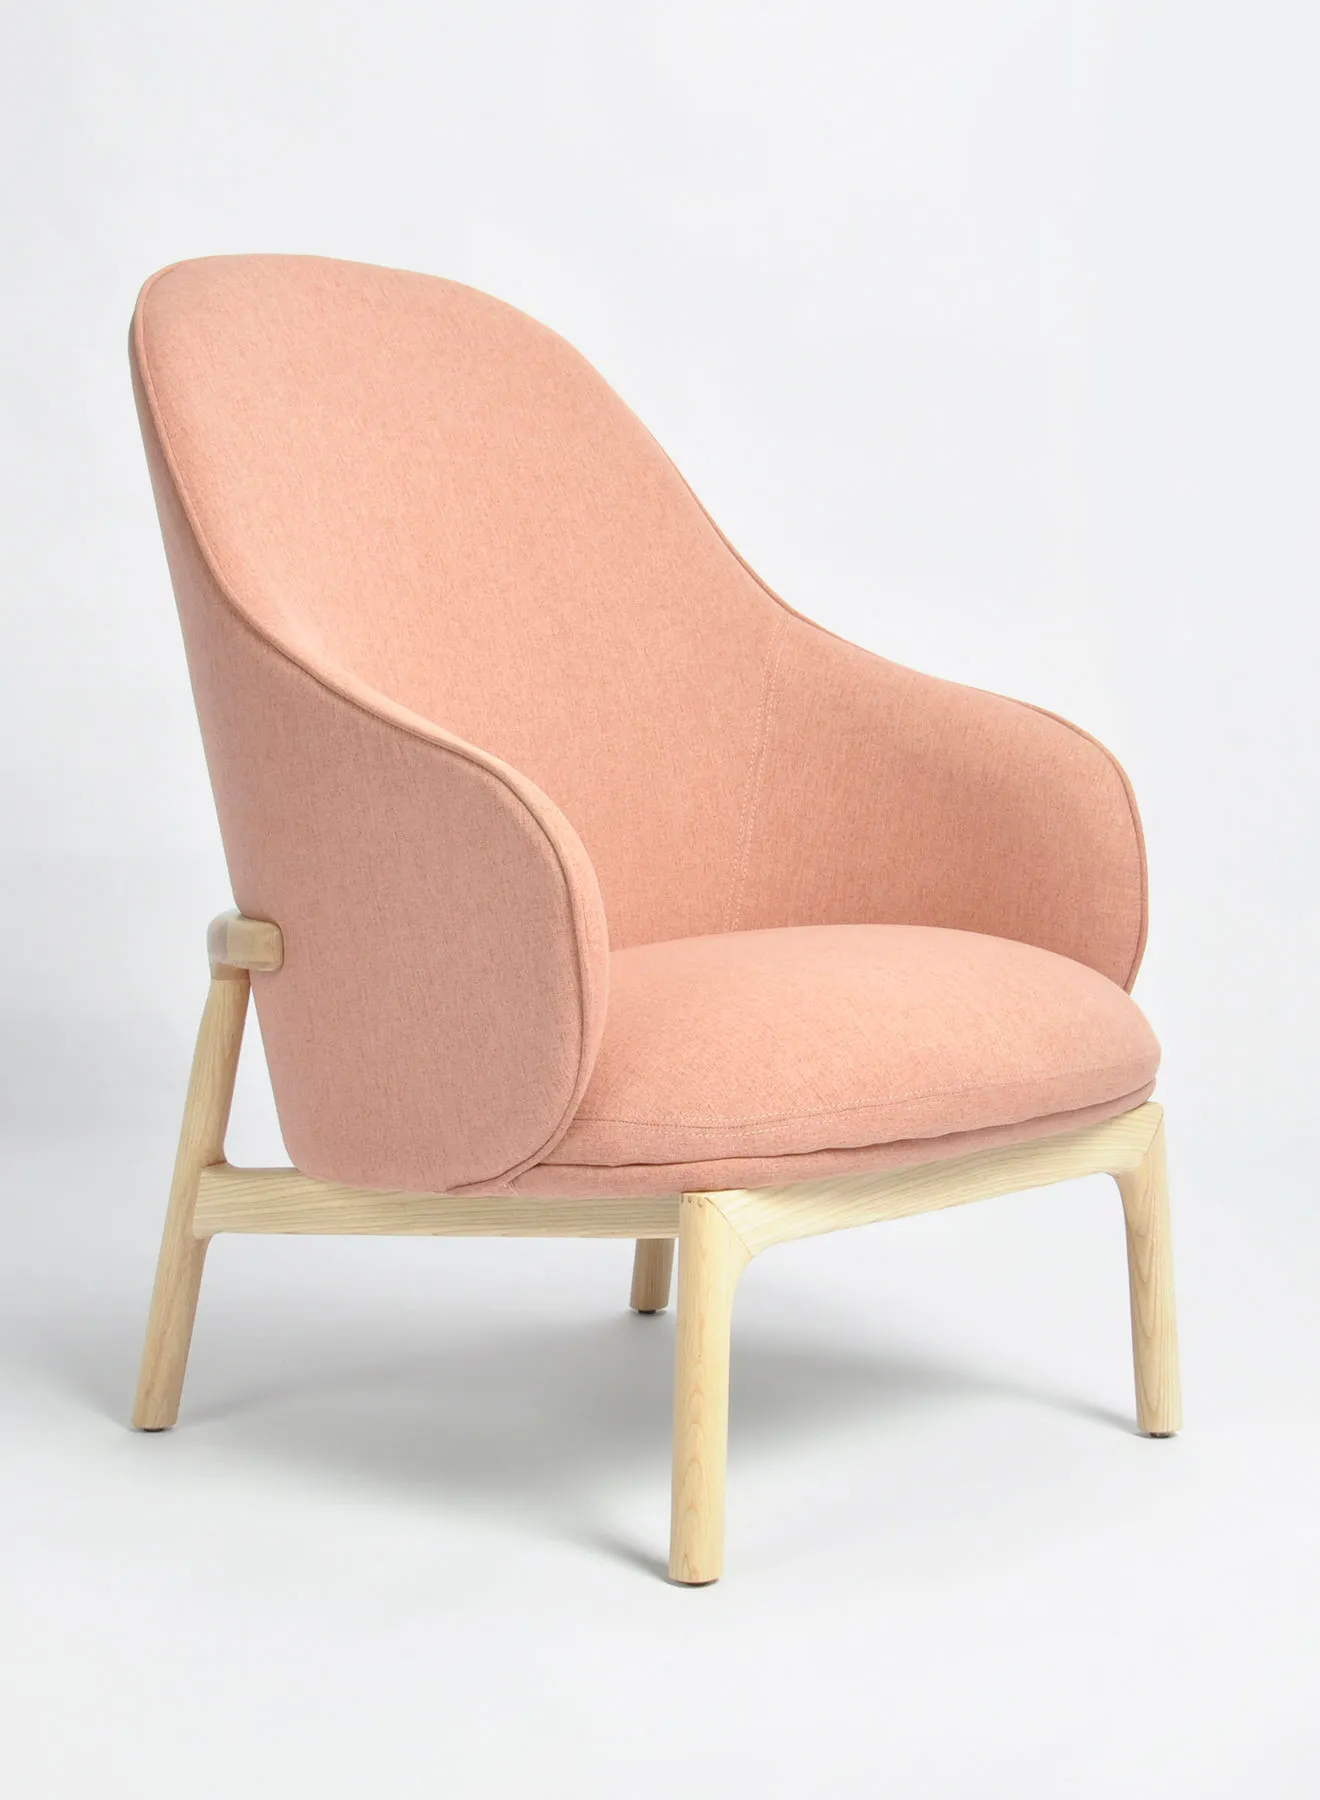 Switch Armchair In Pink Wooden Chair Size 68 X 77 X 75